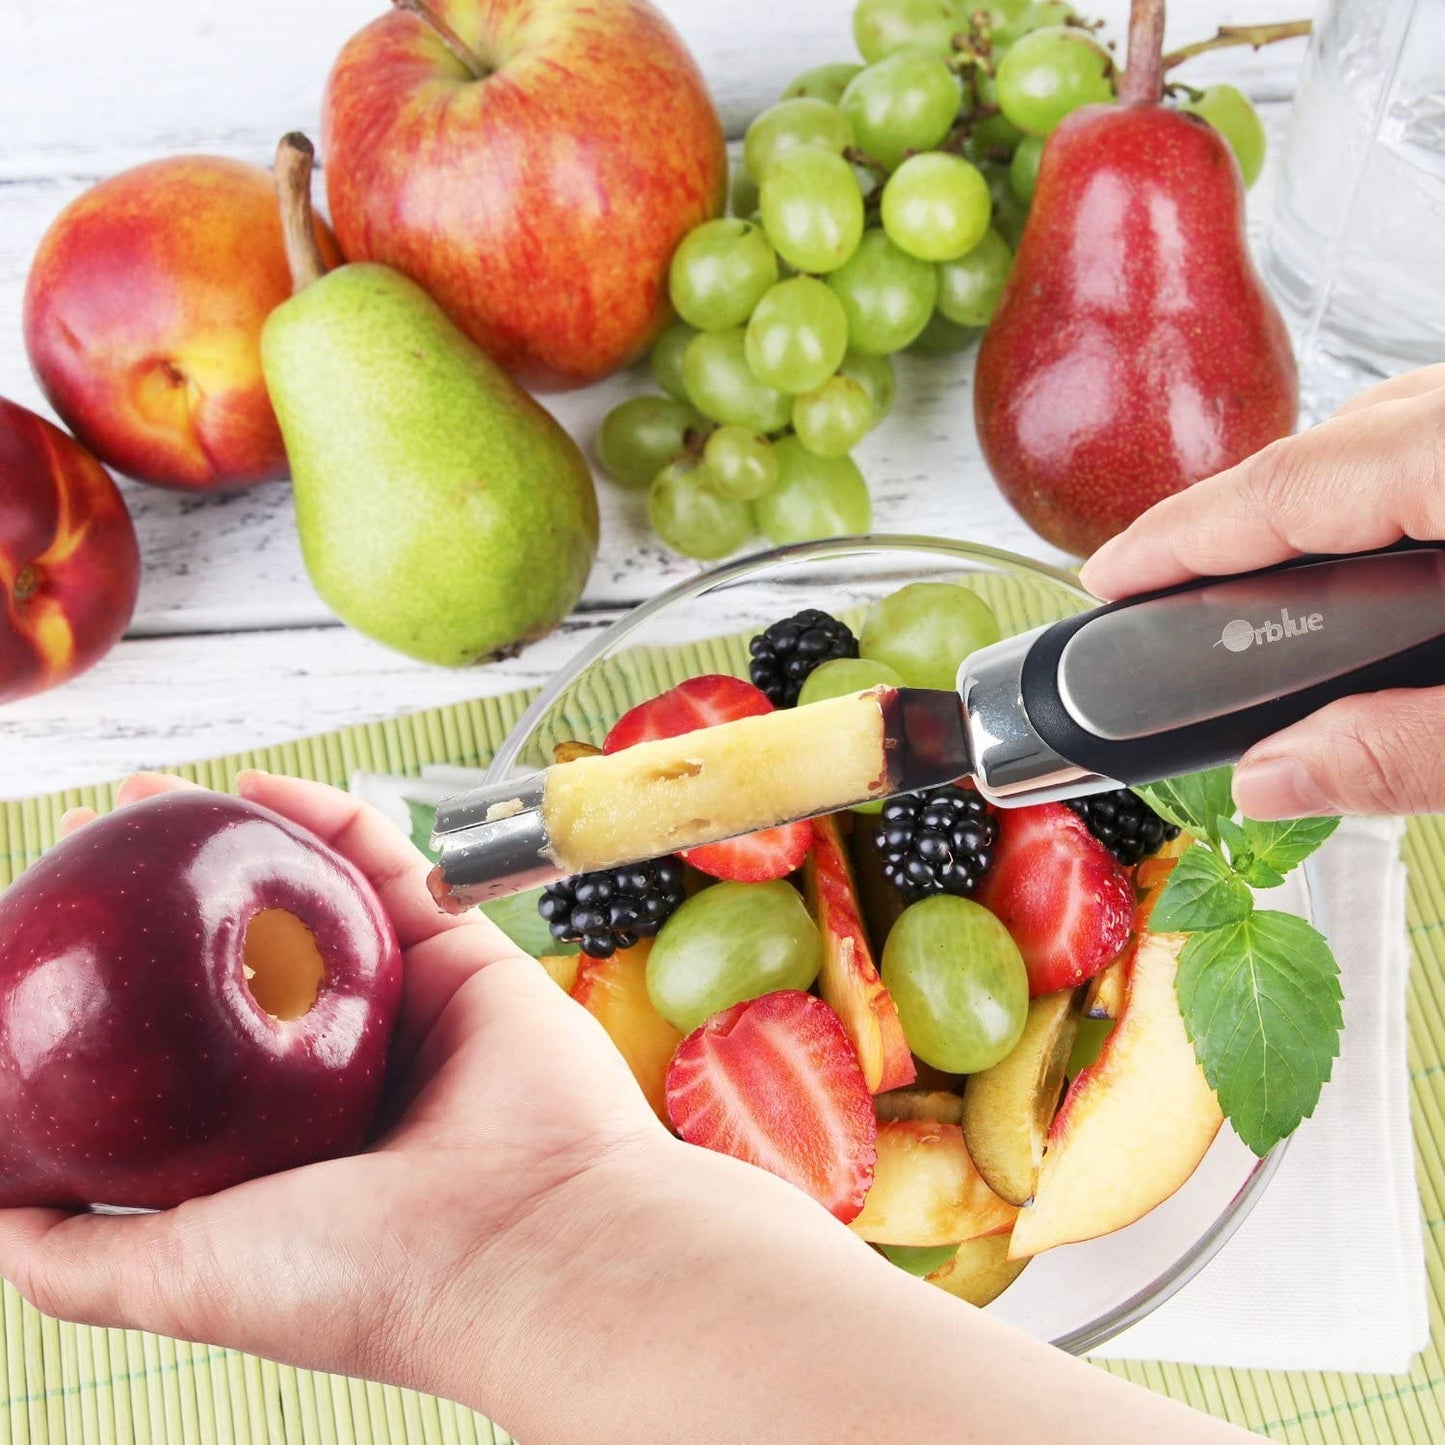 A pair of hands has just used an apple corer to core a red apple. There is also a bowl of fruit salad and various other fruits nearby.